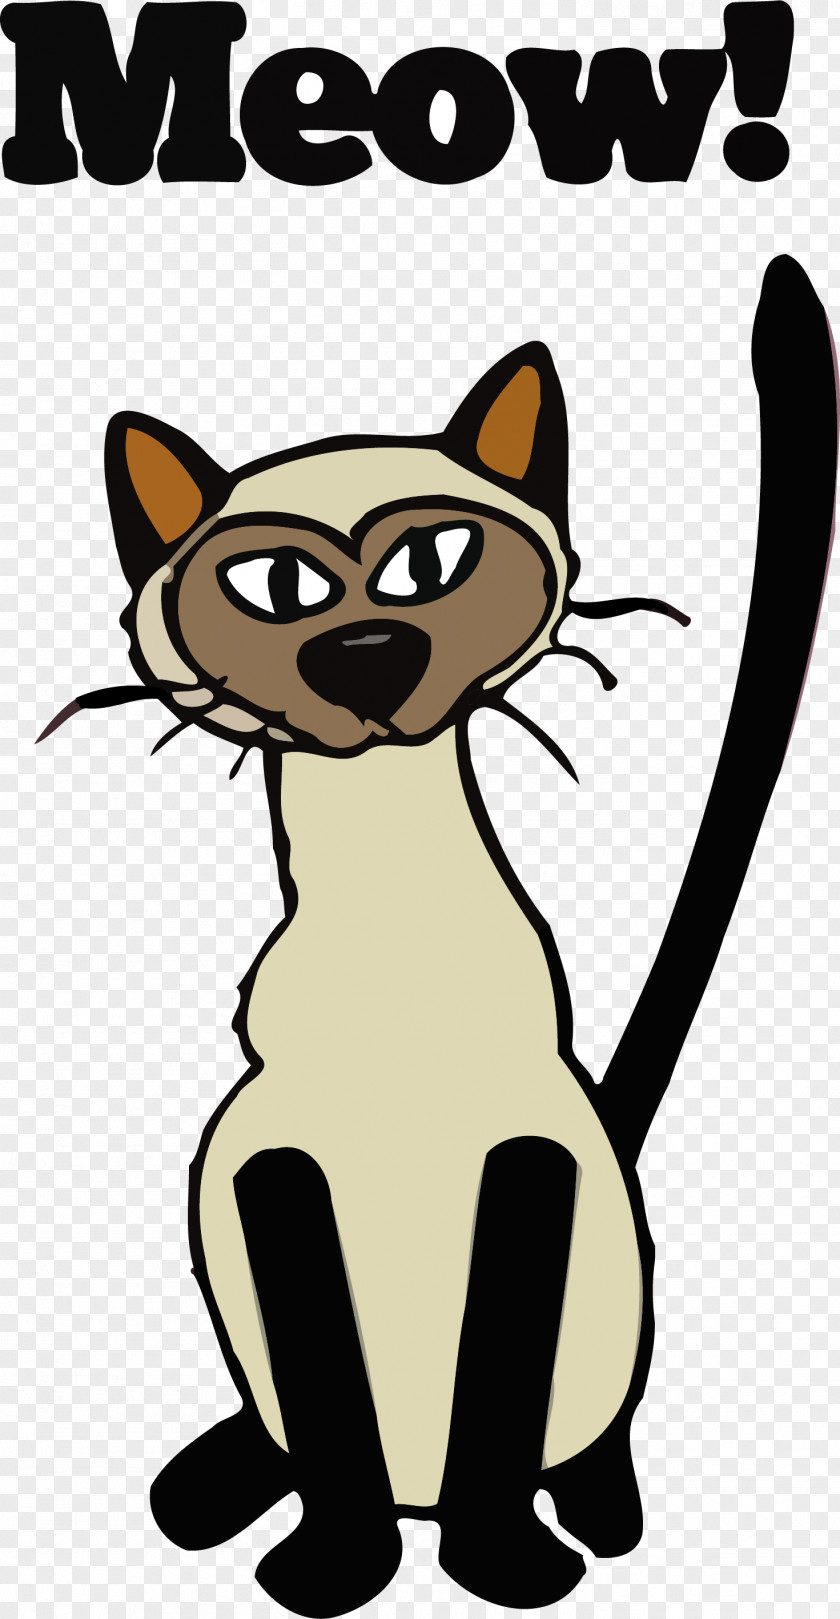 Cat Whiskers Meow Tiger Clip Art PNG